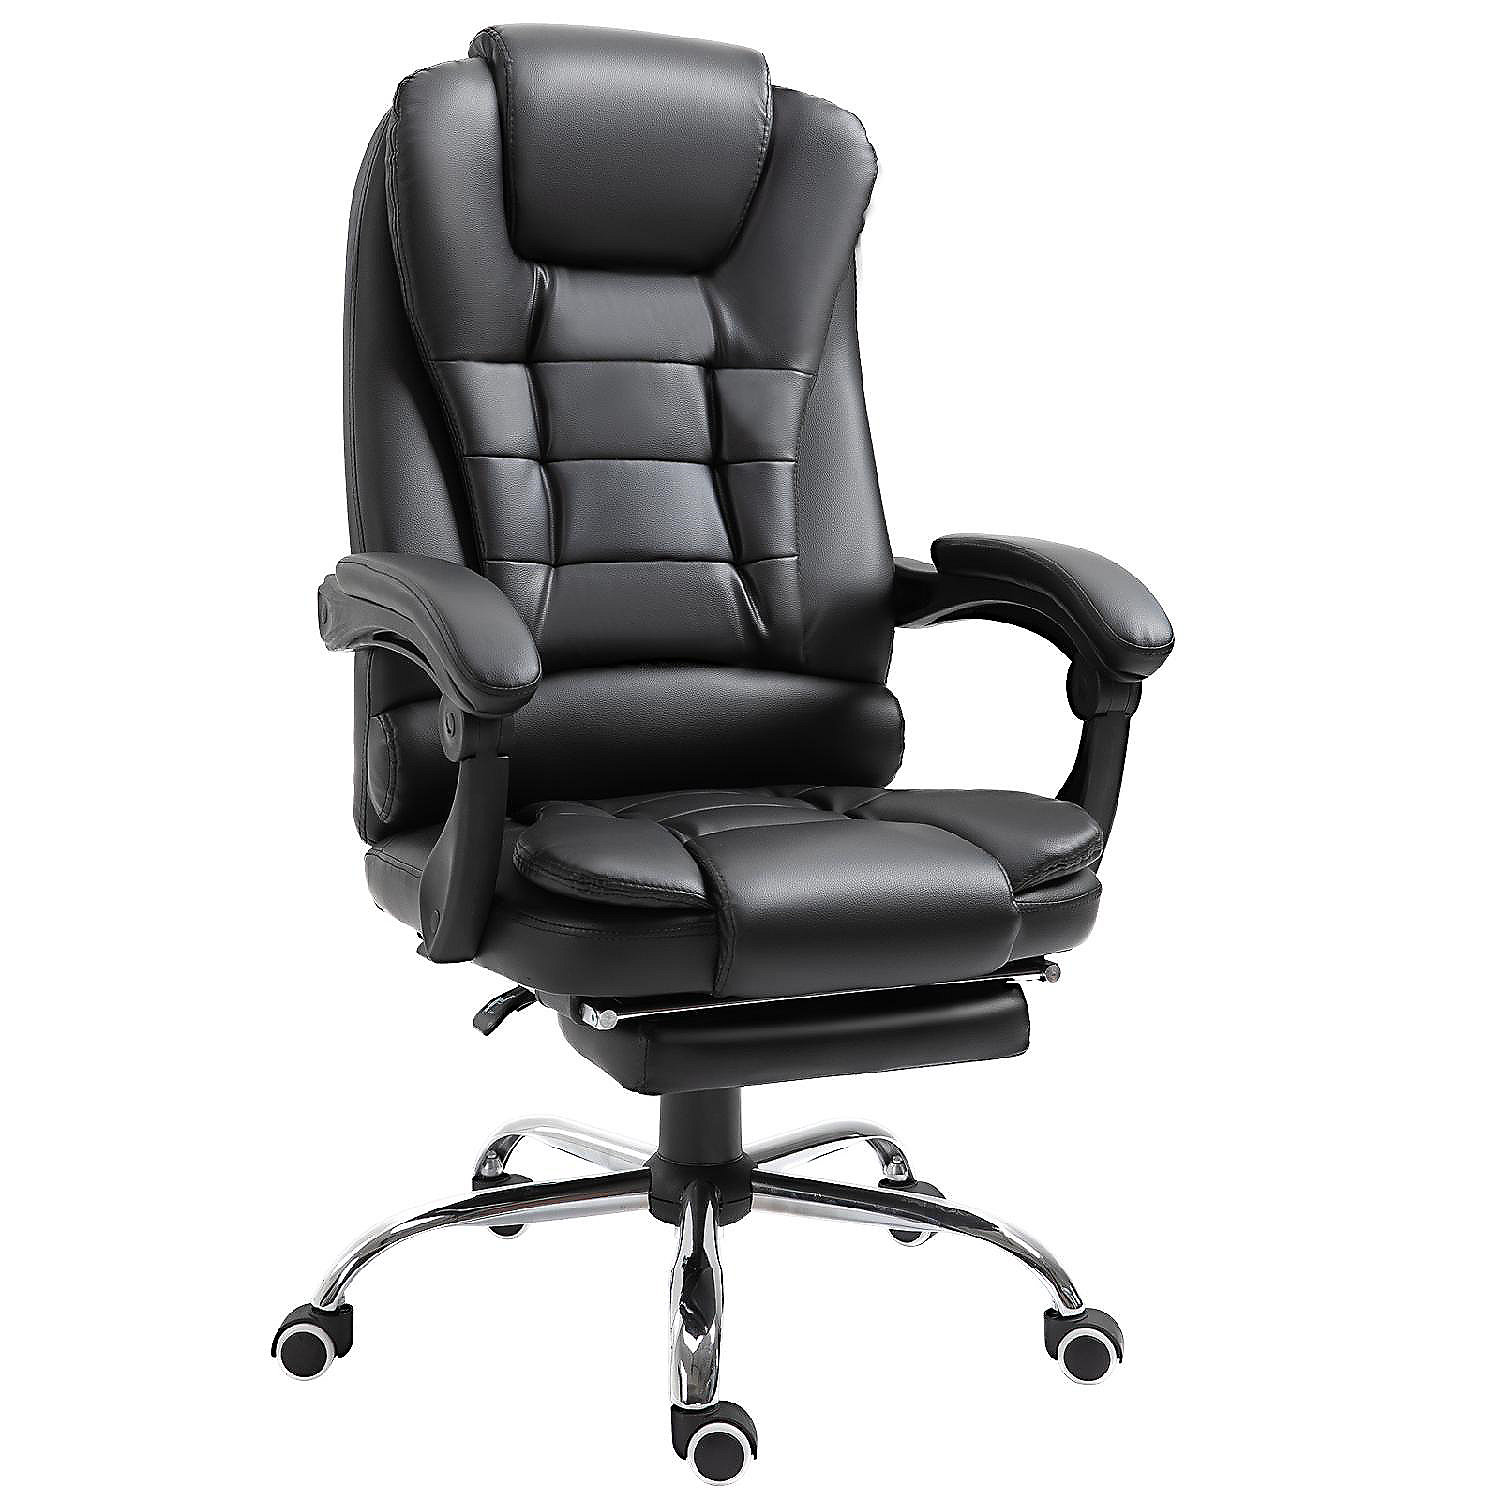 HOMCOM High Back Ergonomic Executive Office Chair PU Leather Computer Chair  with Retractable Footrest Lumbar Support Padded Headrest and Armrest Black  | Oriental Trading